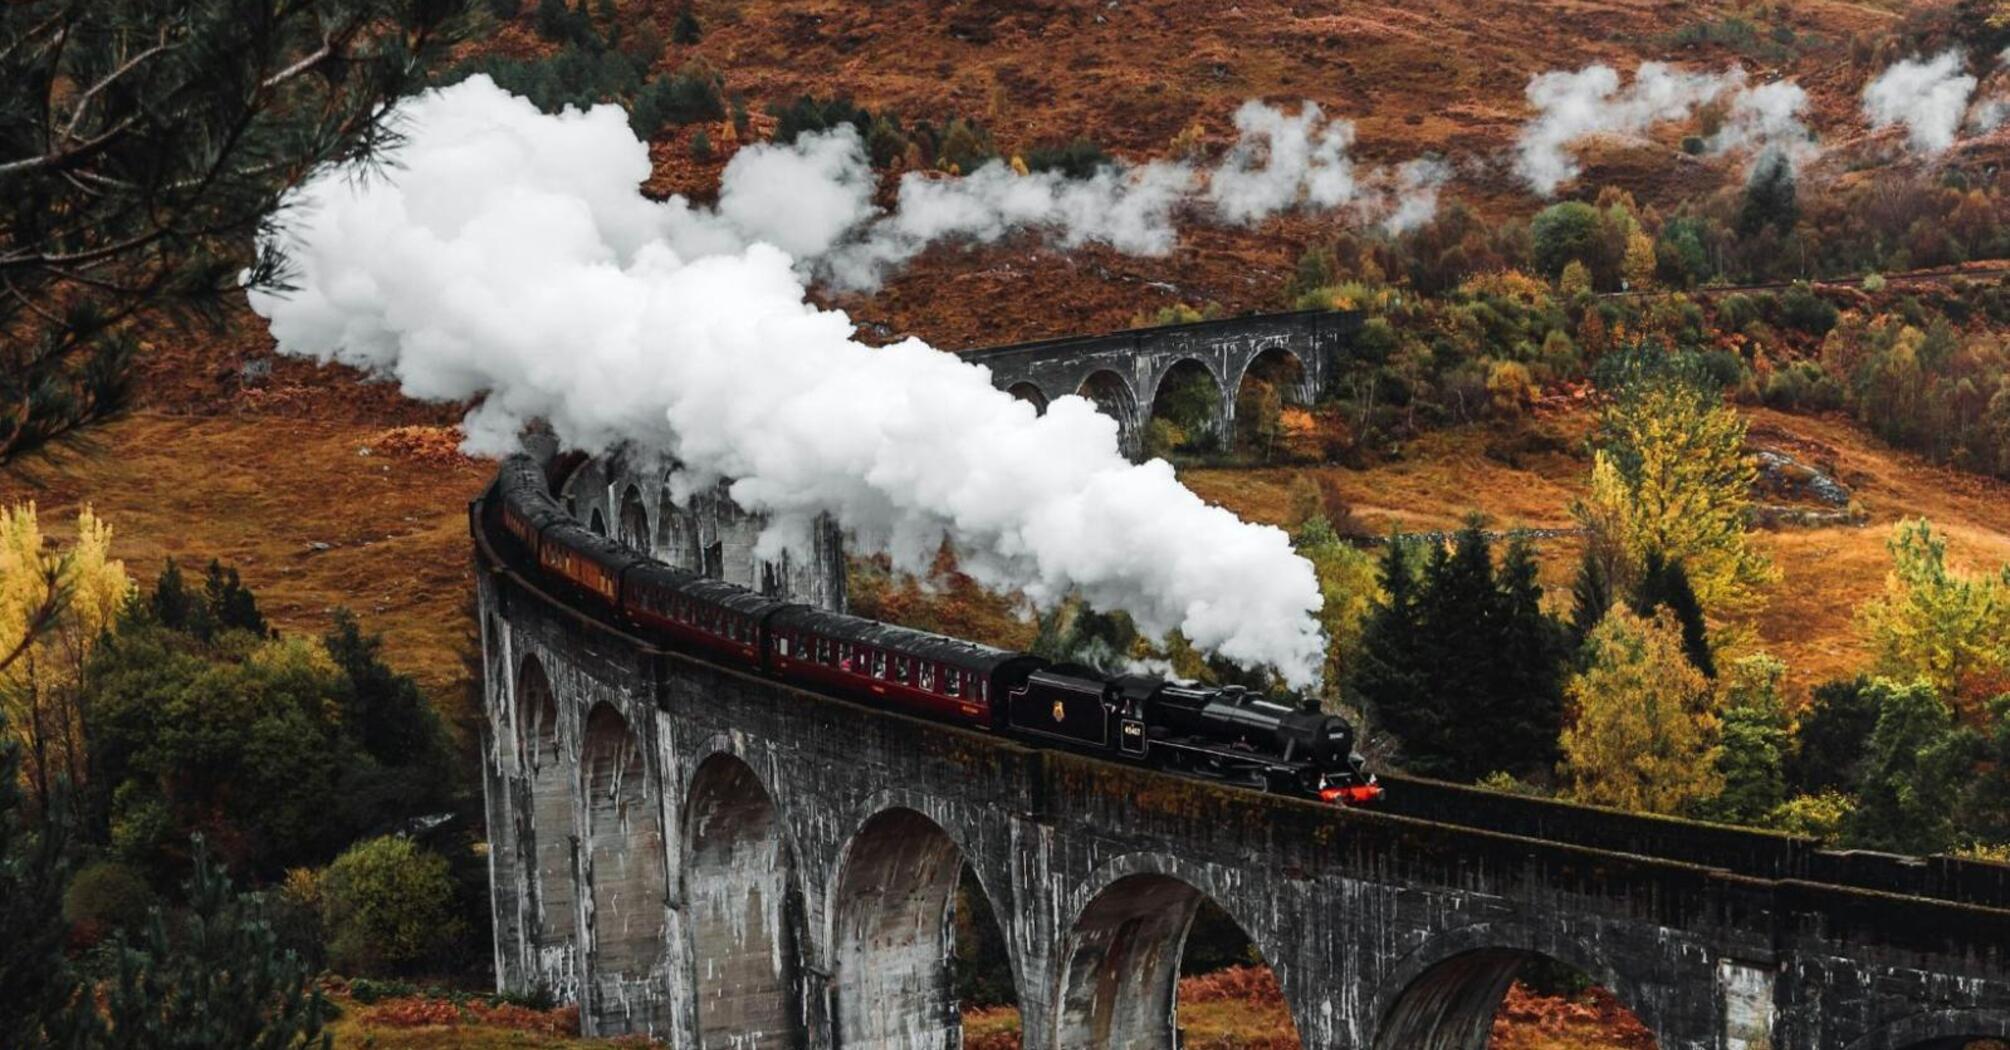 A historic steam train traveling across a picturesque viaduct